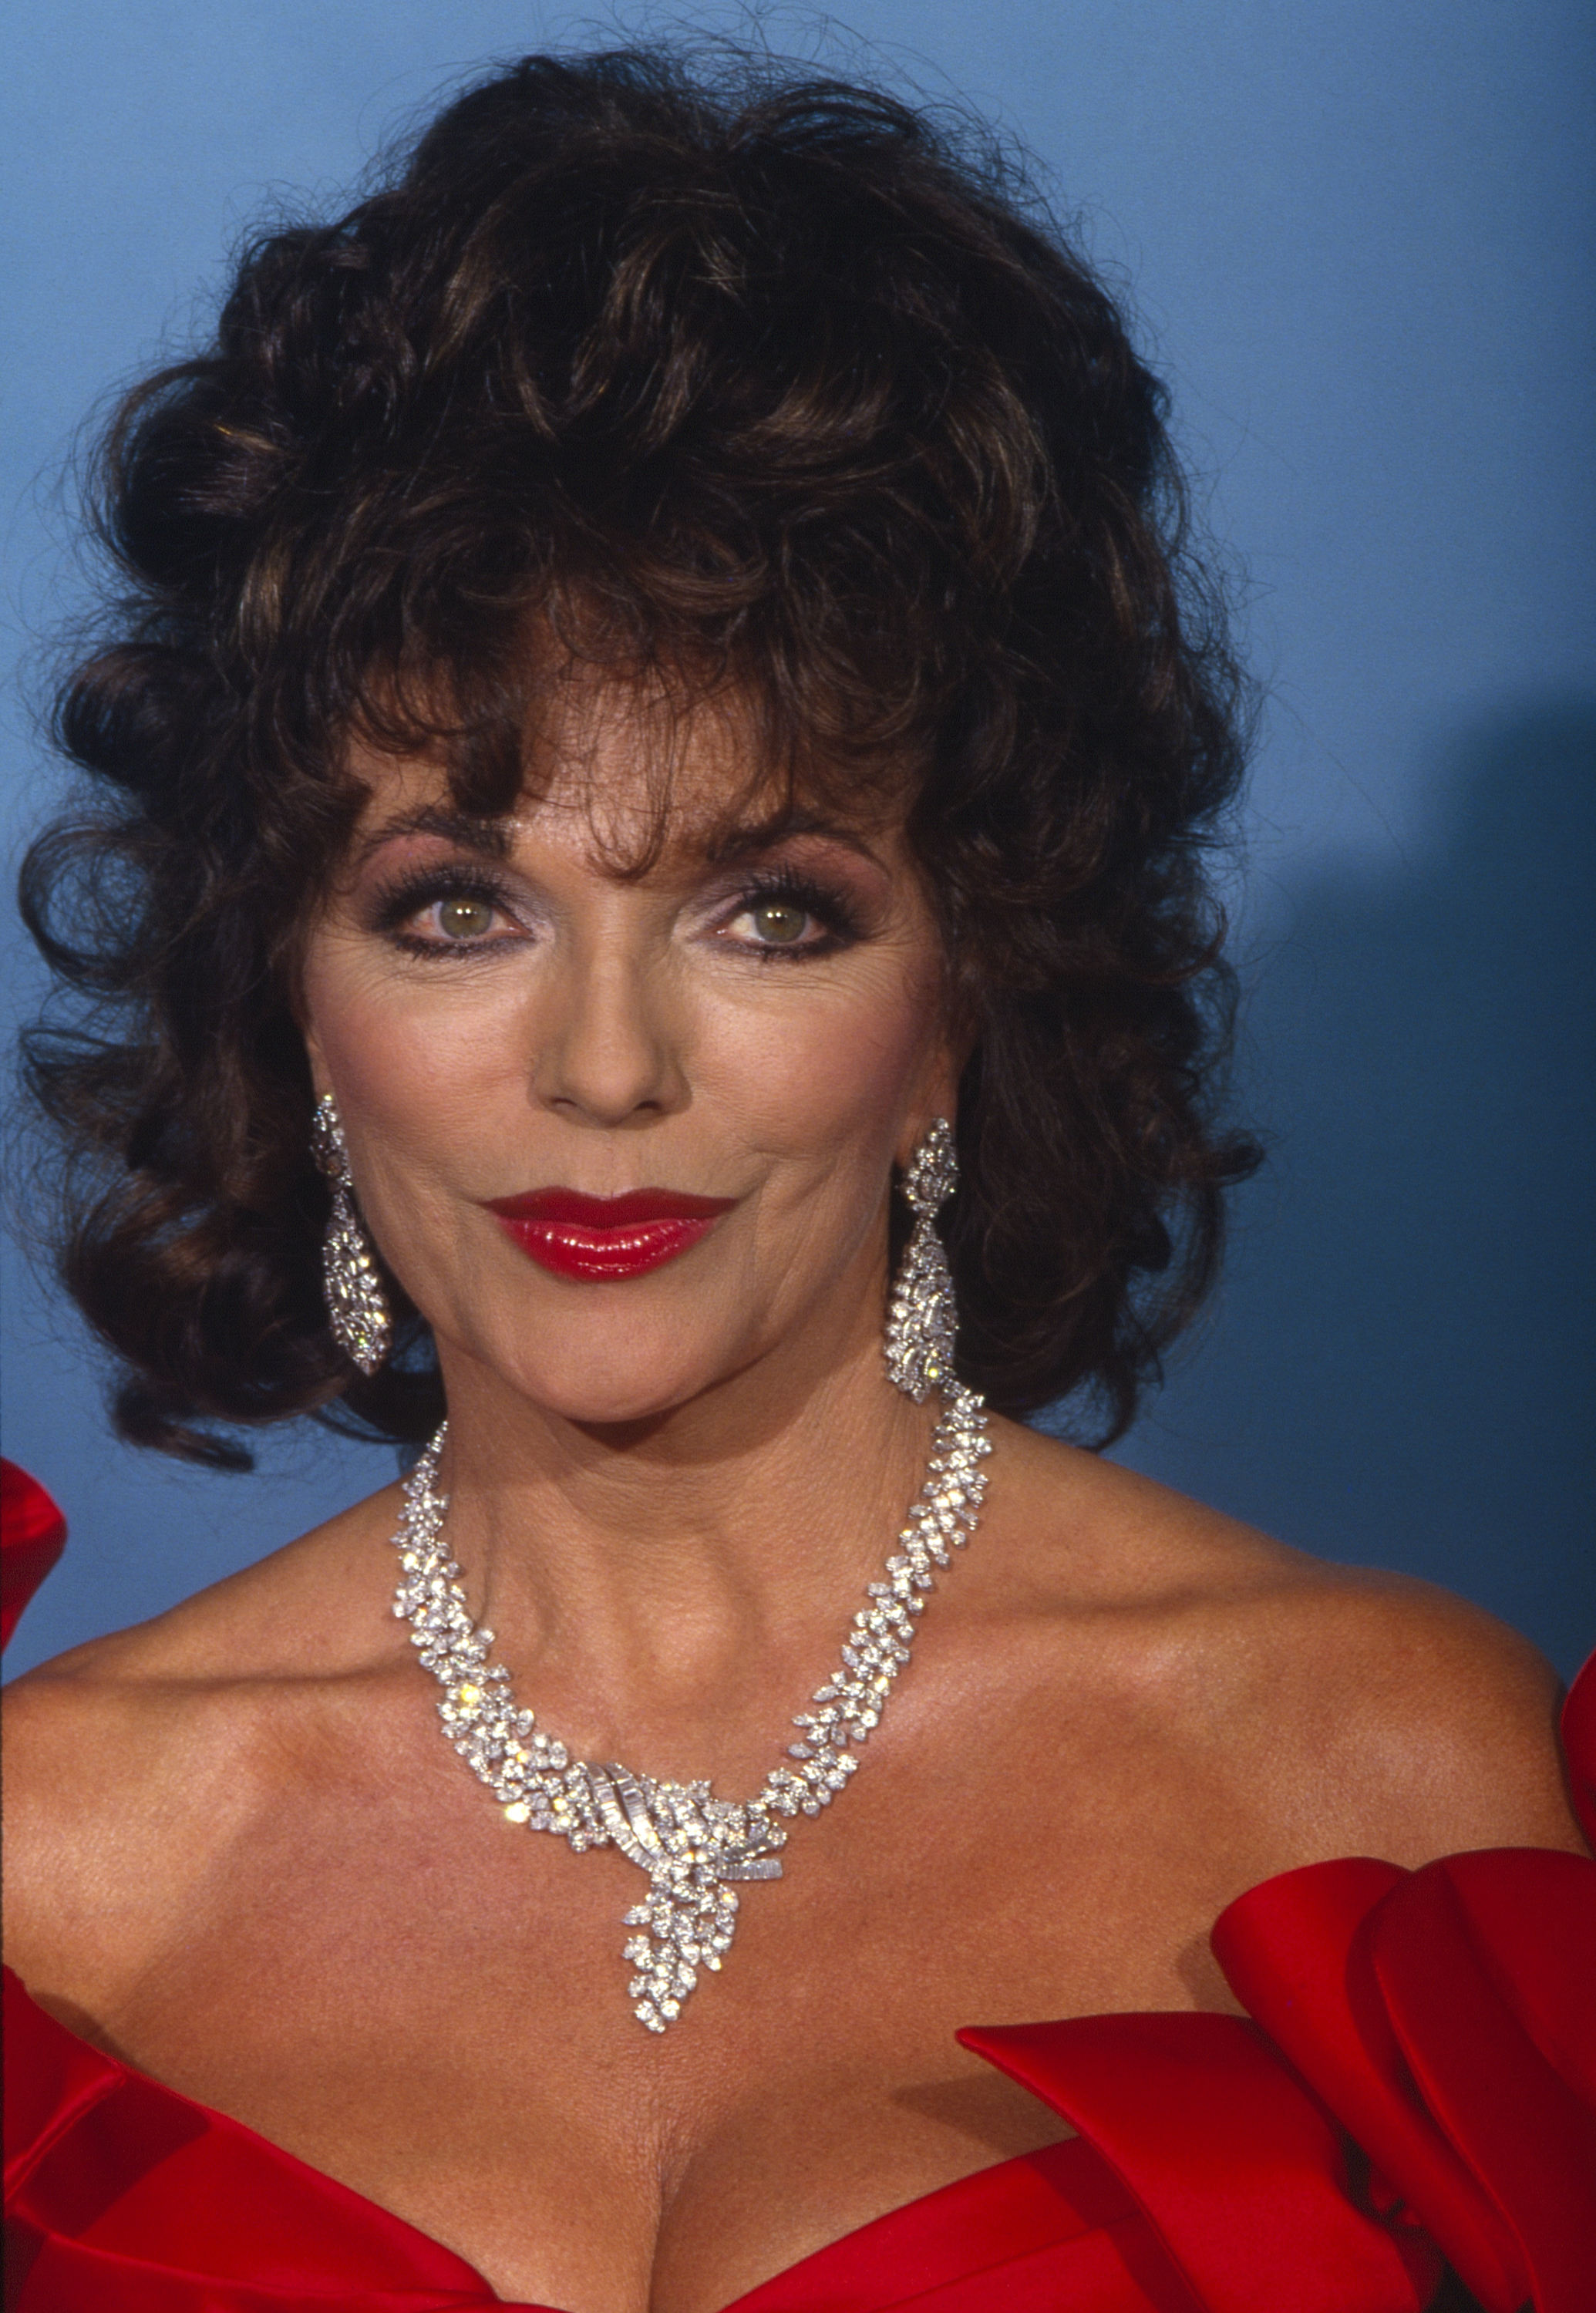 Joan Collins photographed backstage at the Emmy Awards, September 21, 1986 in Los Angeles, California | Source: Getty Images